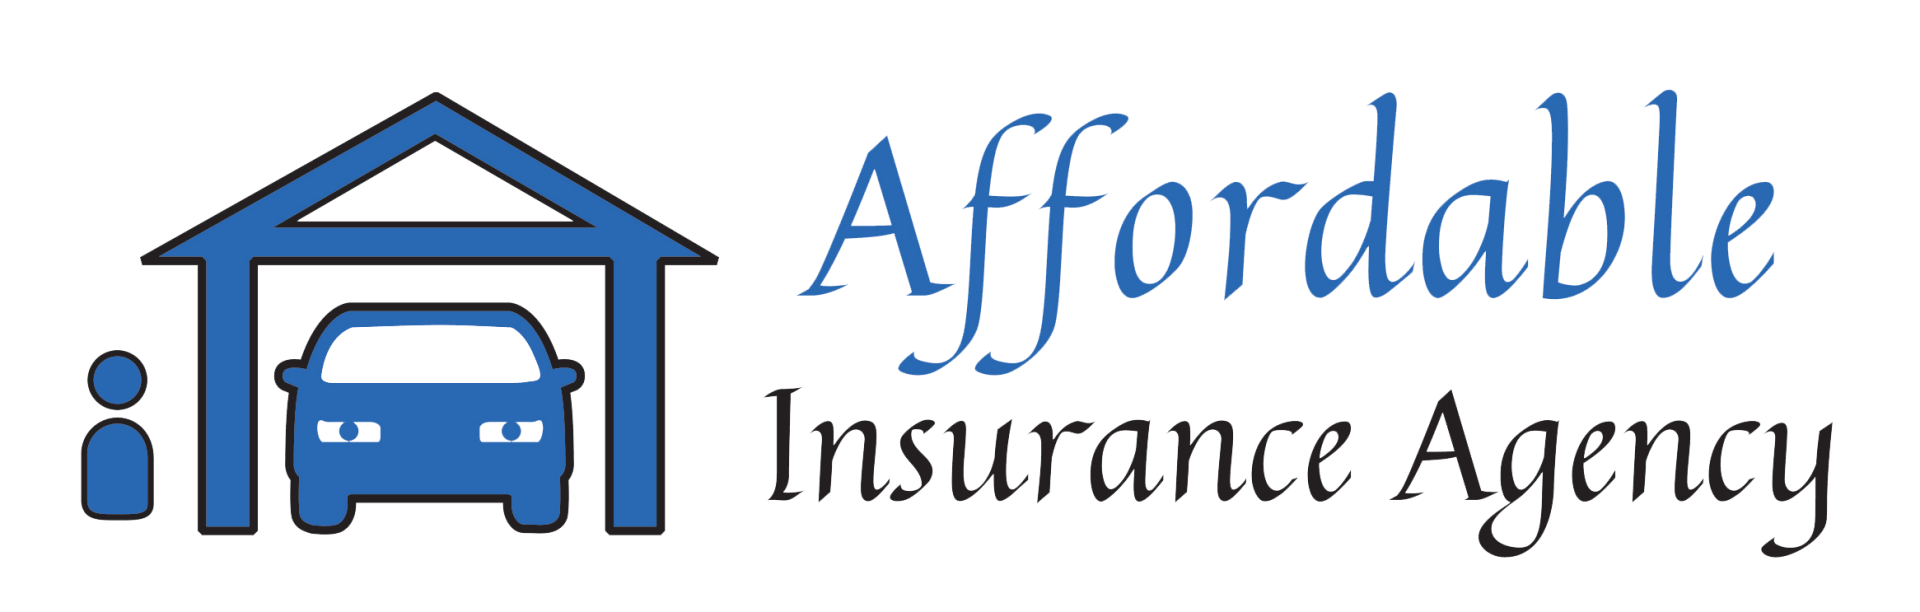 Low Insurance Rates Pitman Haddon Township Affordable Insurance Agency